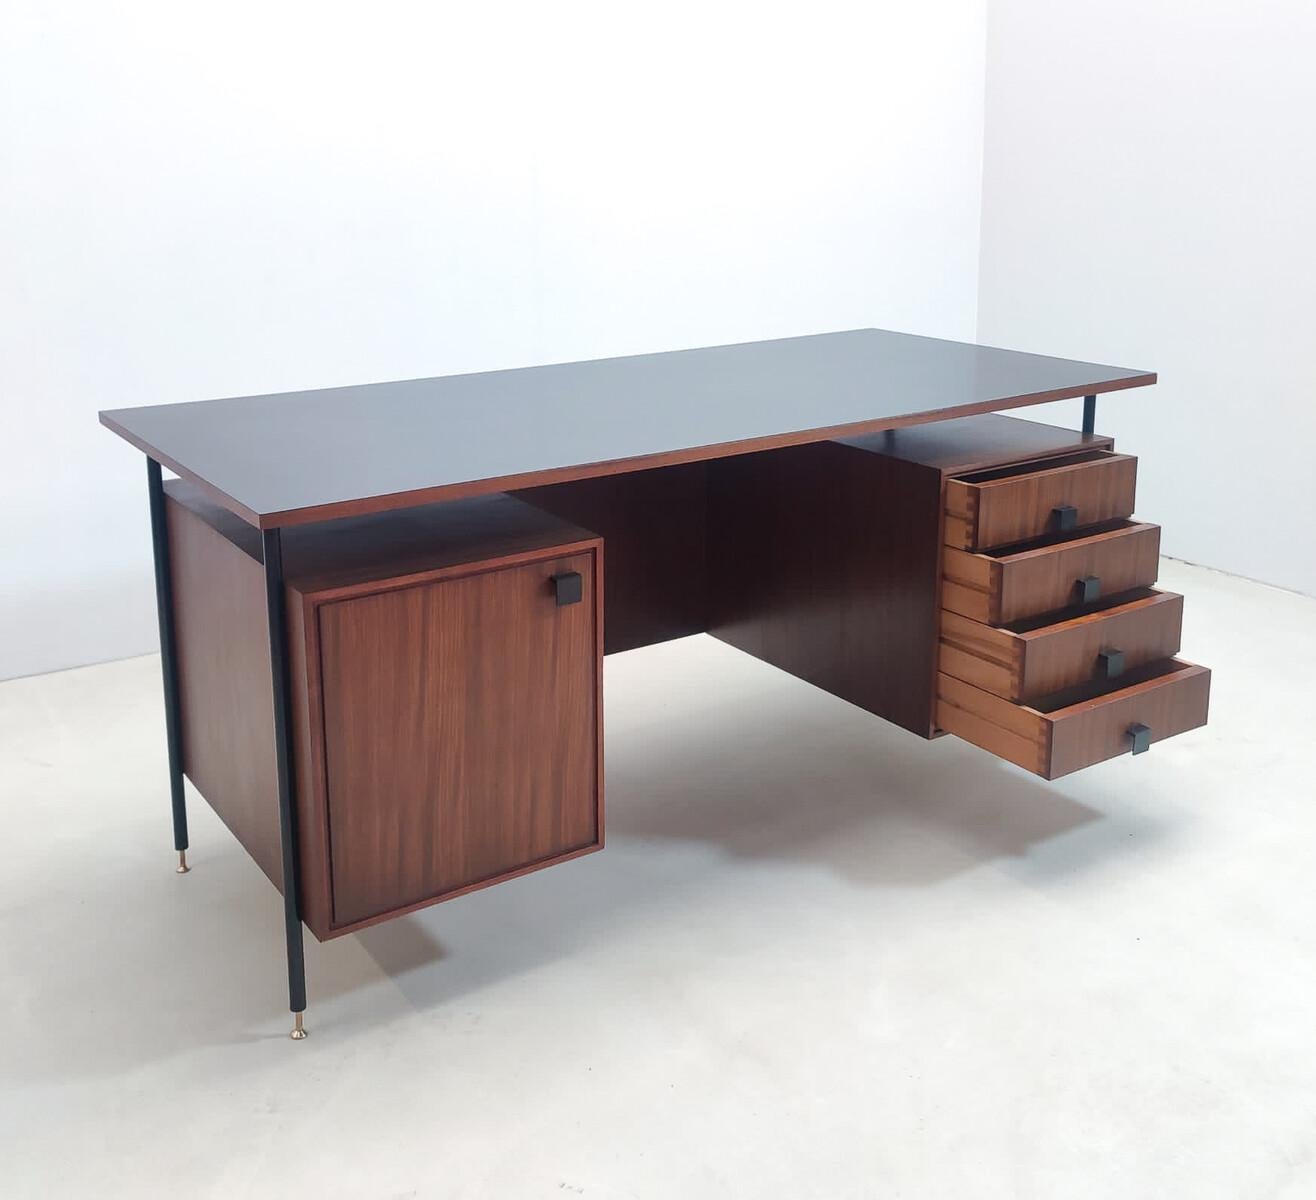 Mid-20th Century Mid-Century Modern Italian Desk with Drawers, Wood, 1960s For Sale